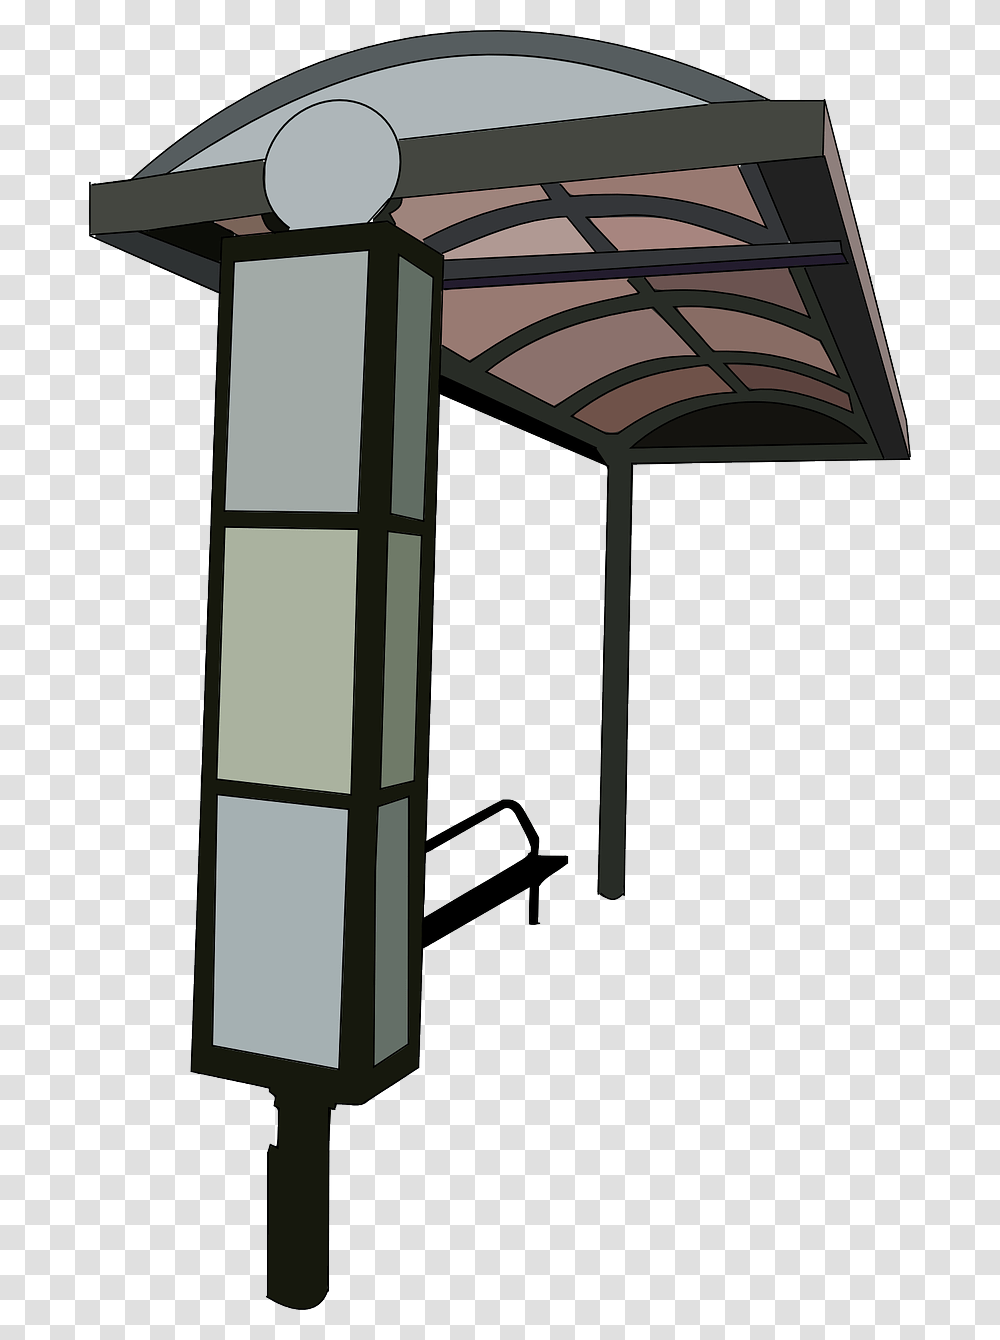 Bus Stop Background, Porch, Patio, Outdoors, Shelter Transparent Png